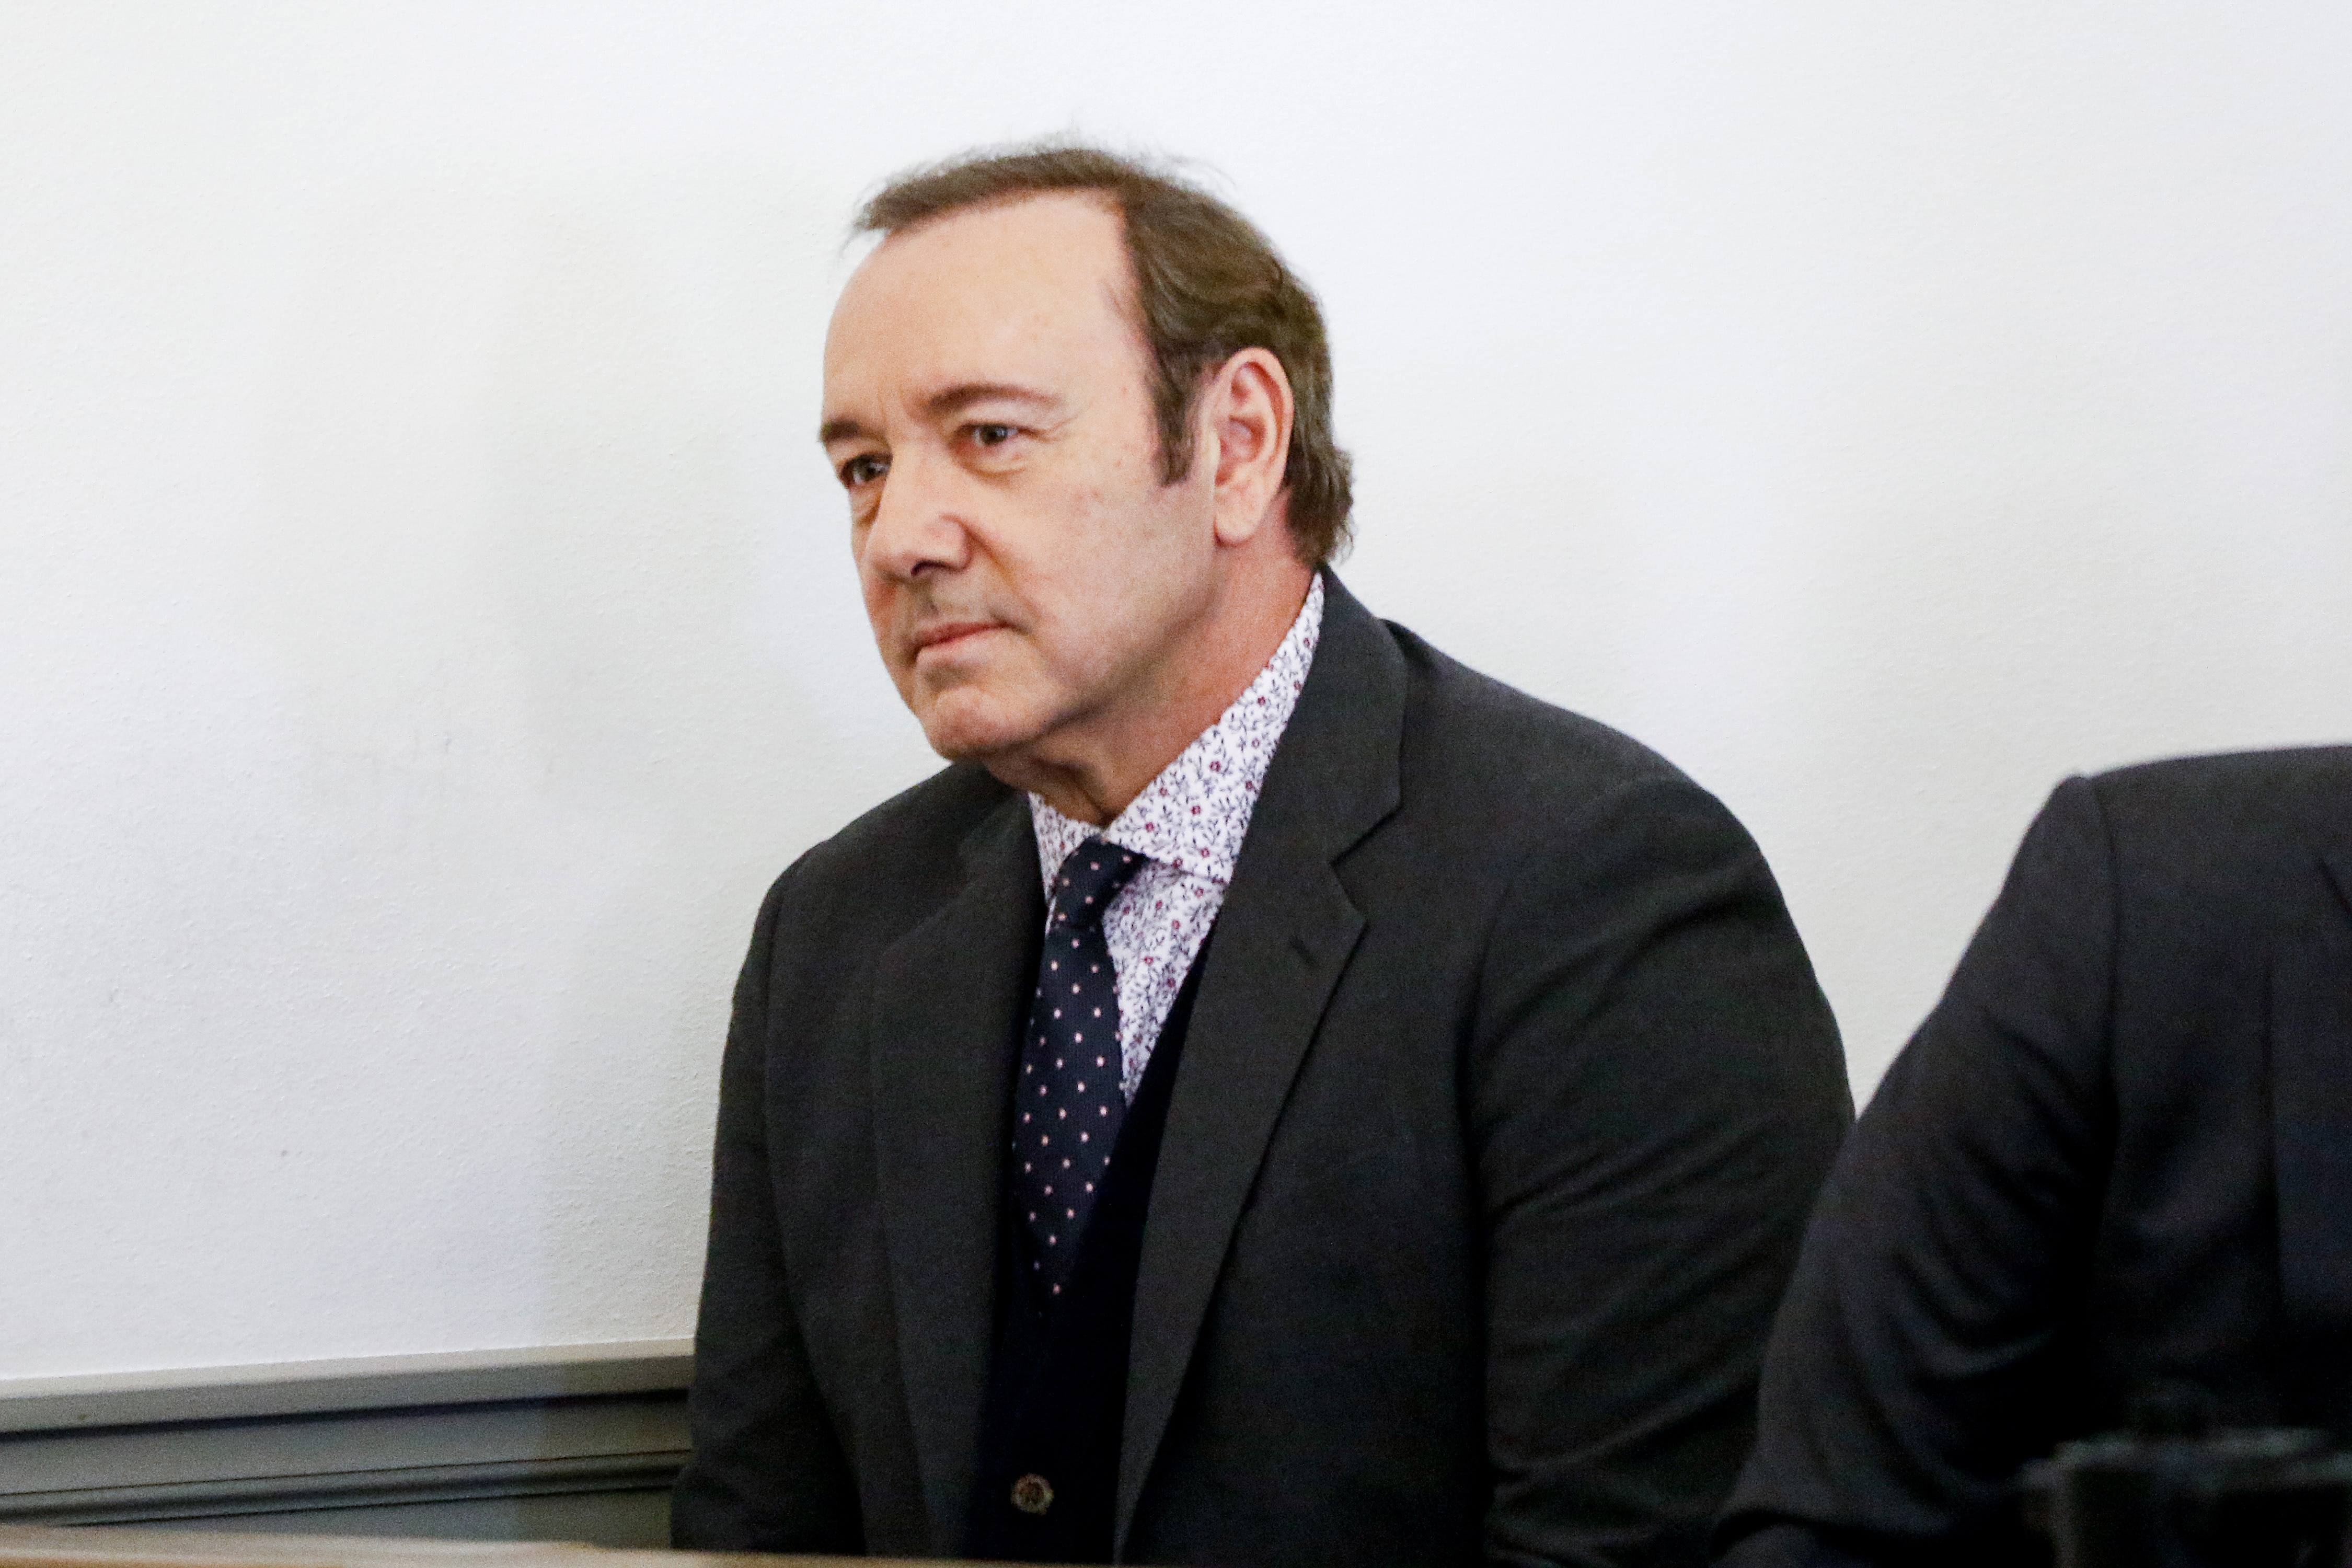 ‘Se7en’ actor Kevin Spacey charged with four counts of sexual assault in London